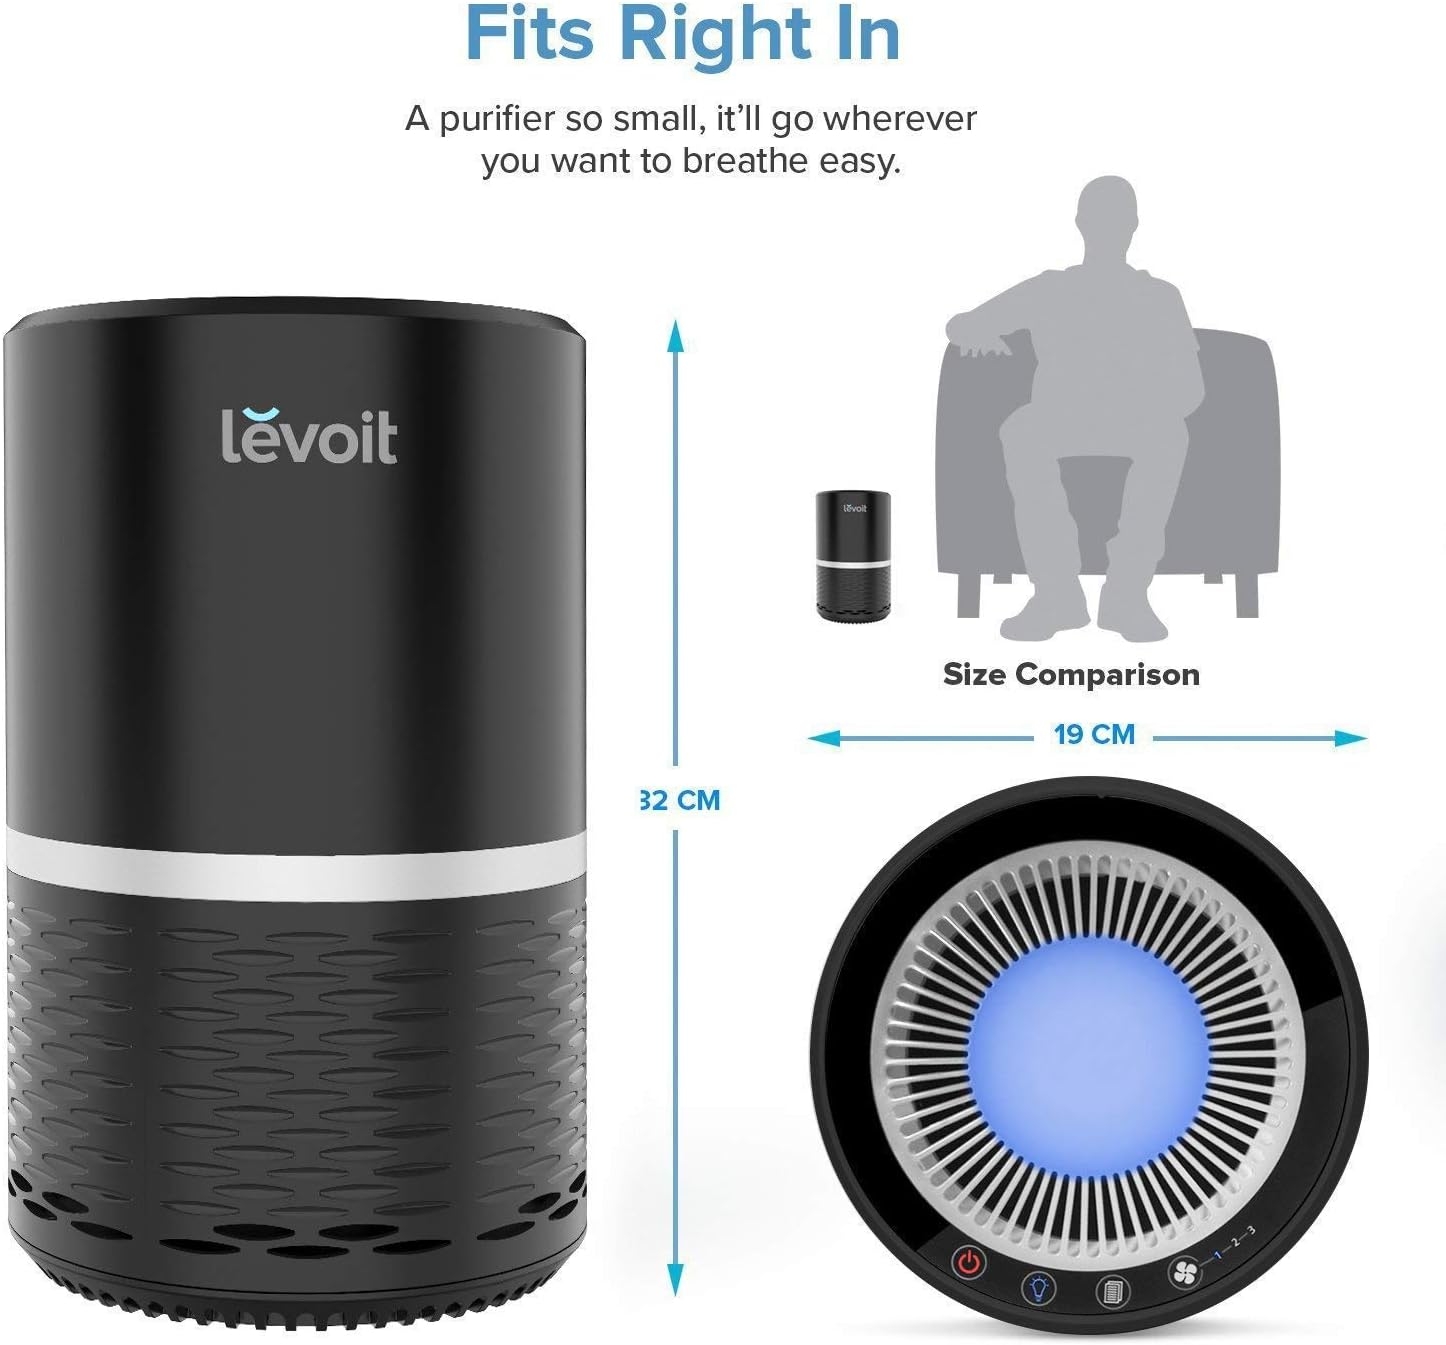 LEVOIT Air Purifier for Home, H13 True HEPA Filter for Allergies and Pets, Dust, Mold, and Pollen, Smoke and Odor Eliminator, Cleaner for Bedroom with Optional Night Light, LV-H132, Black